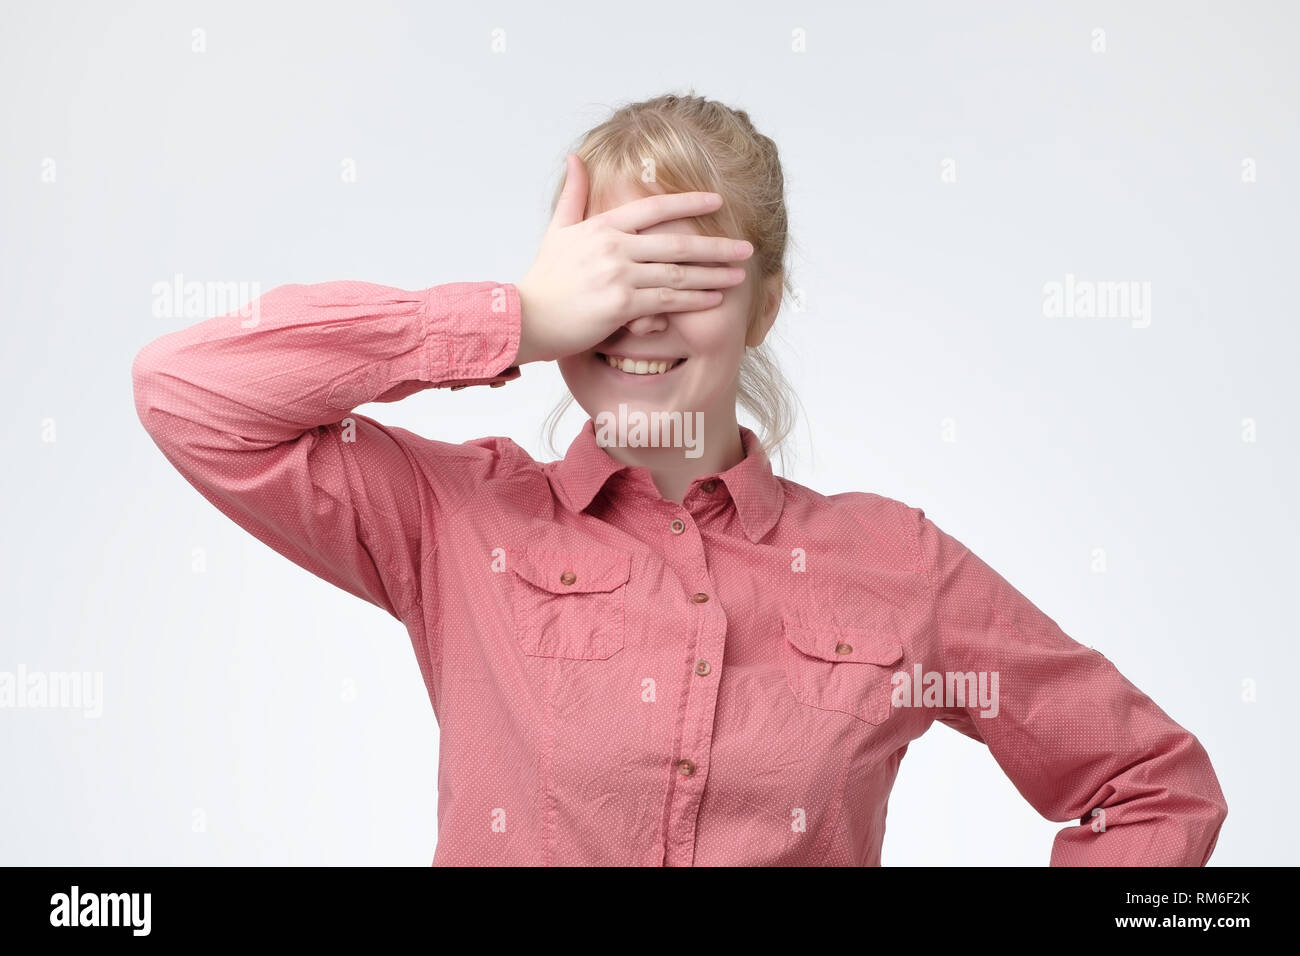 Funny portrait of smiling blonde girl close her eyes with her hands, waiting for gift. Stock Photo